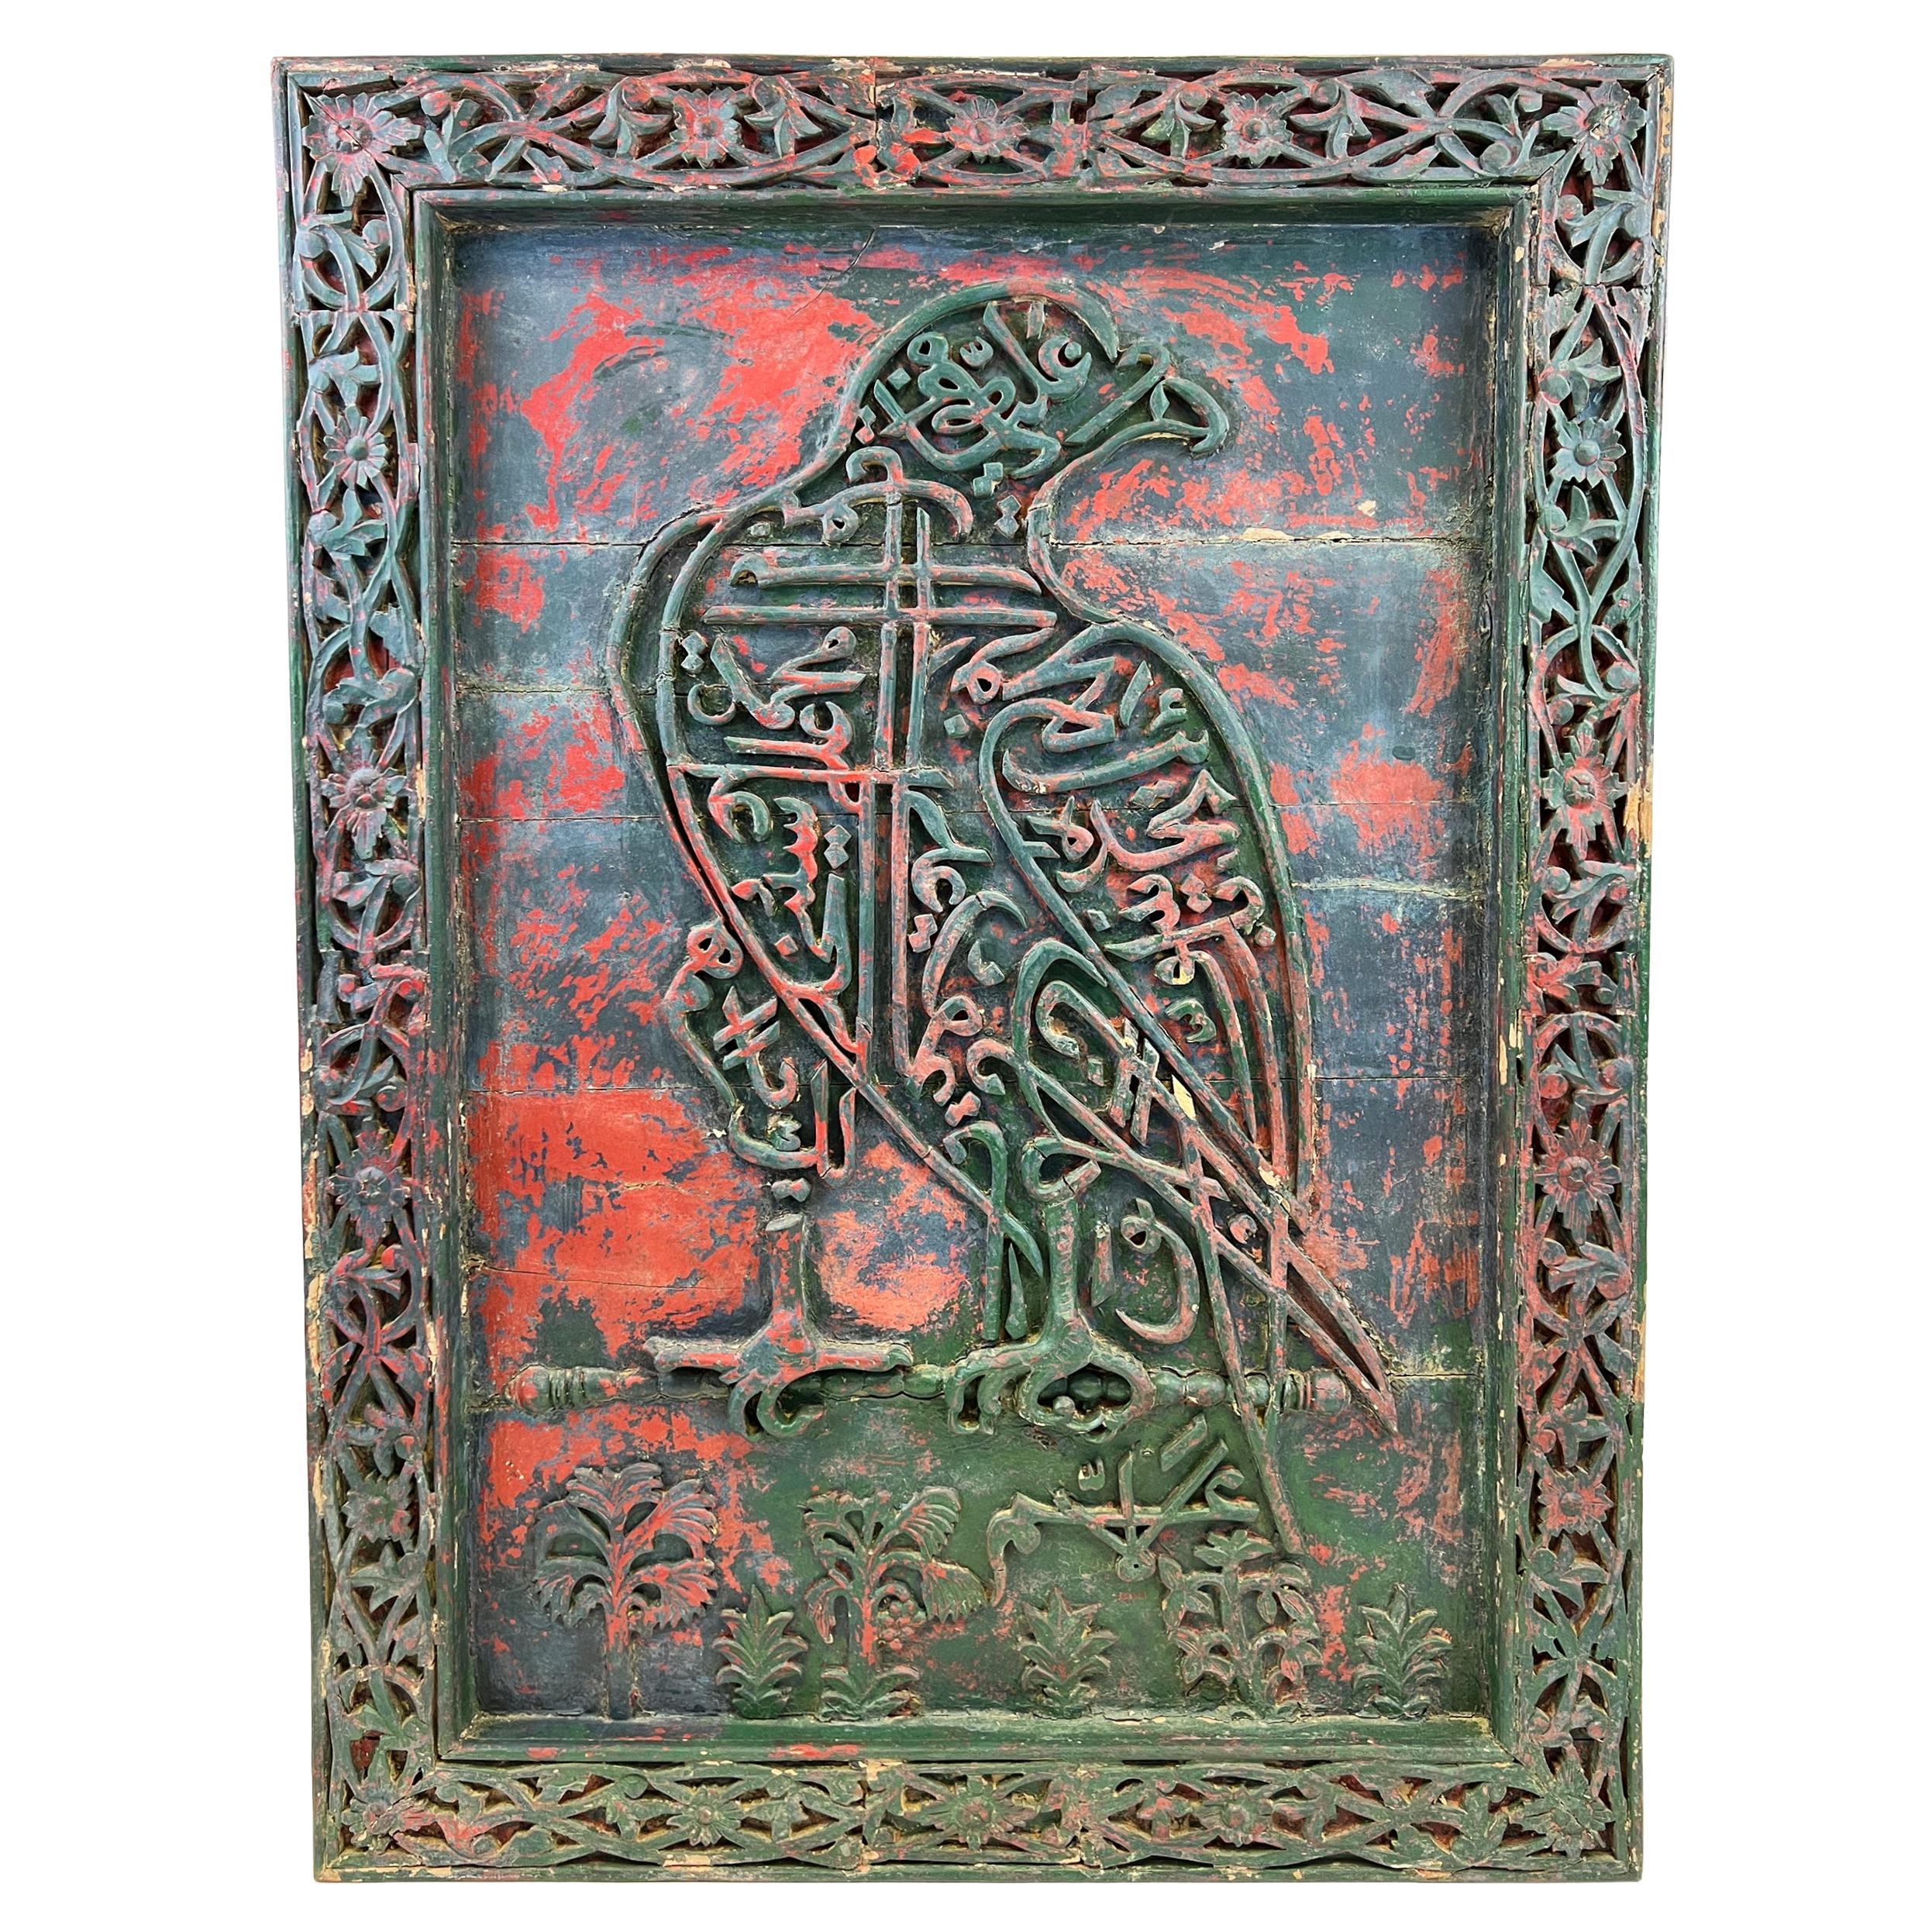 Islamic Calligraphy Carved Wooden Plaque in the Form of a Falcon